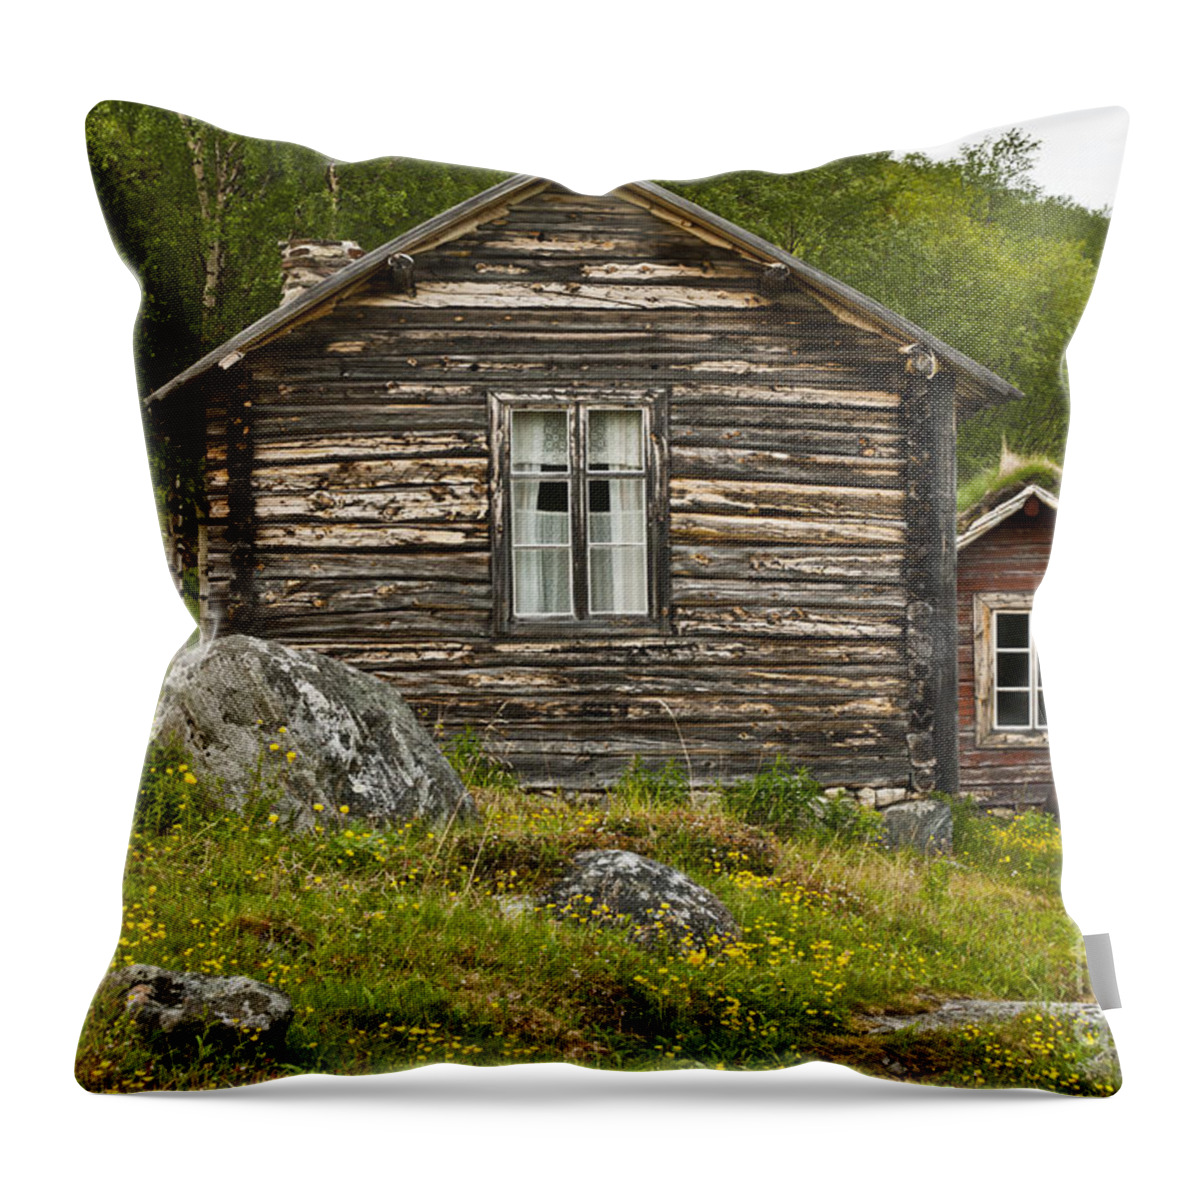 Europe Throw Pillow featuring the photograph Norwegian Timber House by Heiko Koehrer-Wagner